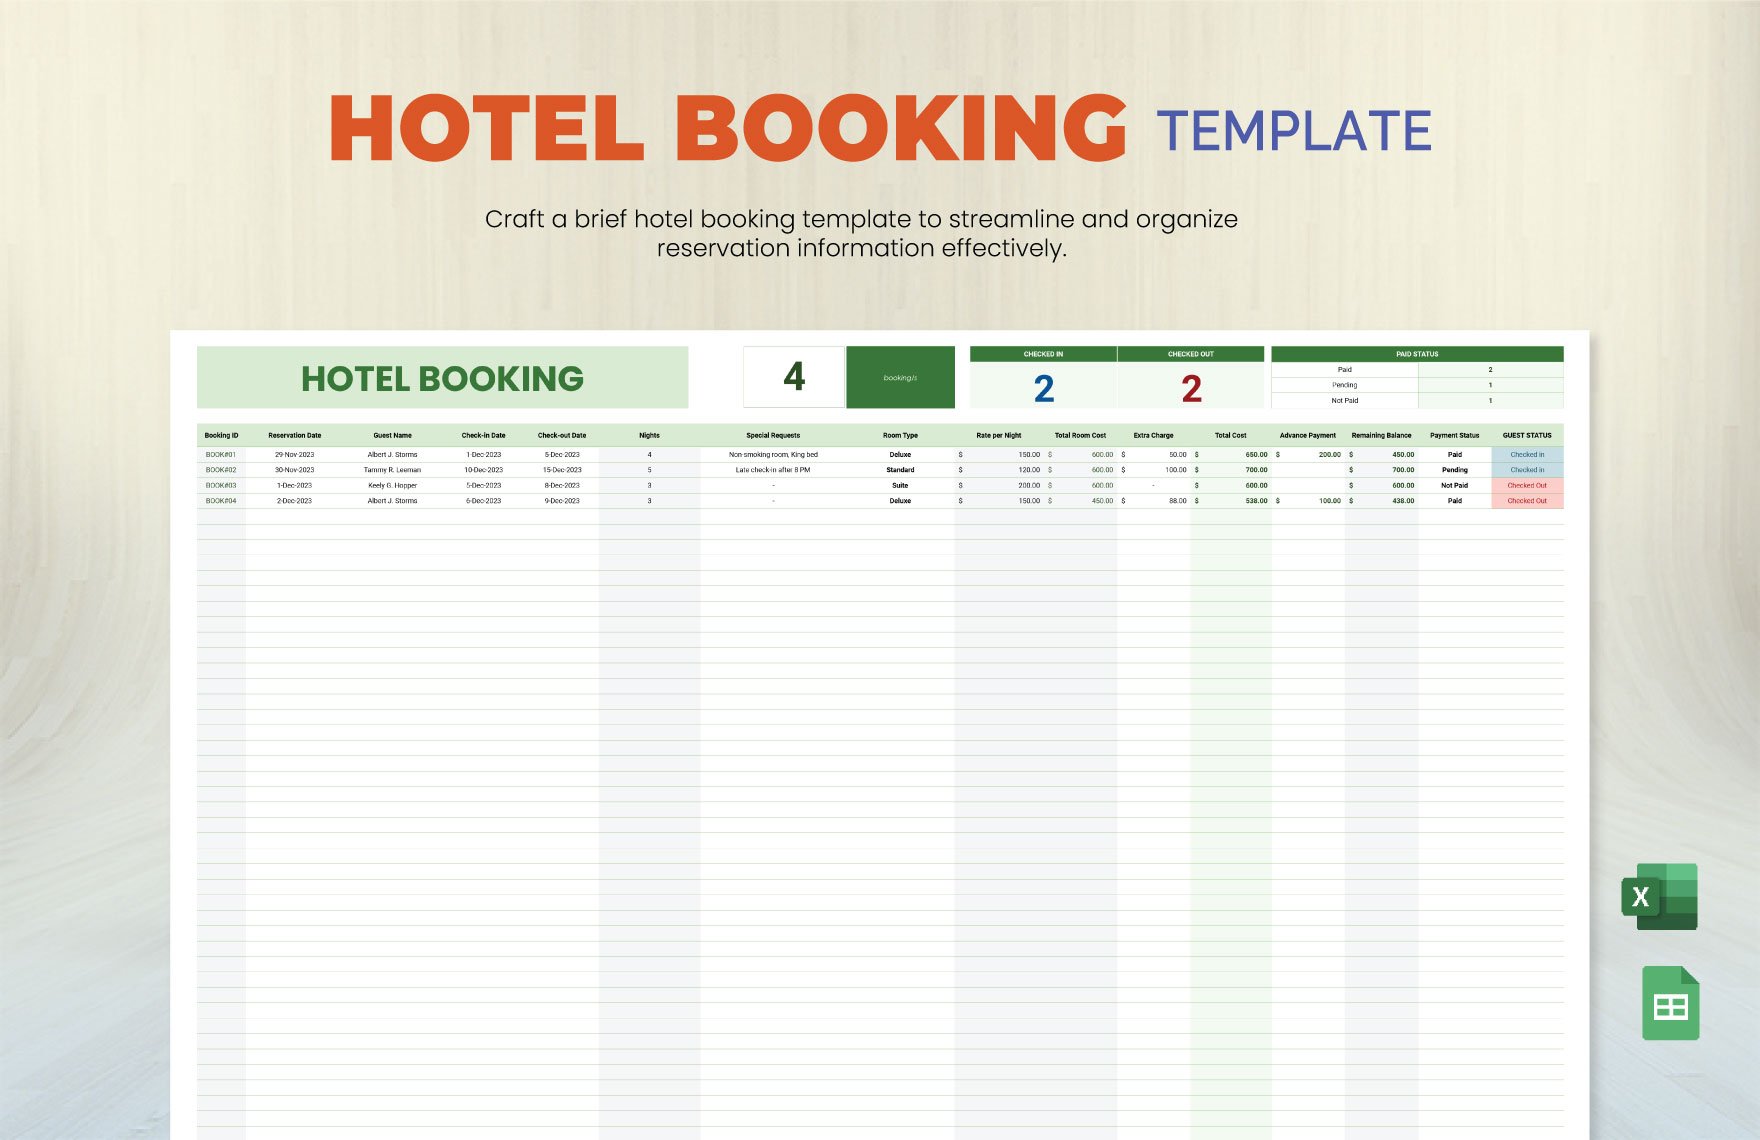 Hotel Booking Template in Excel, Google Sheets